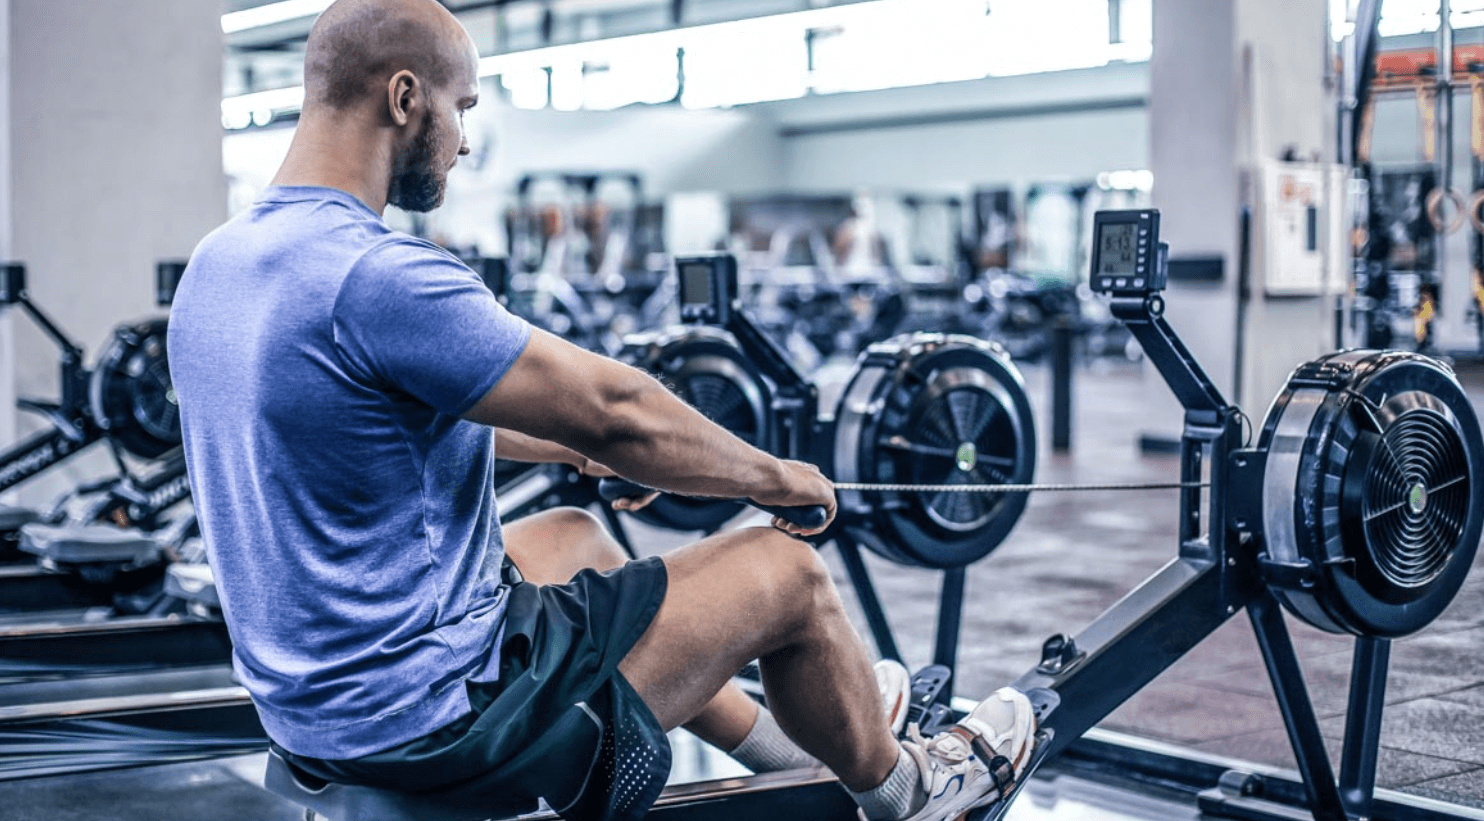 Here are some benefits of using rowing machine